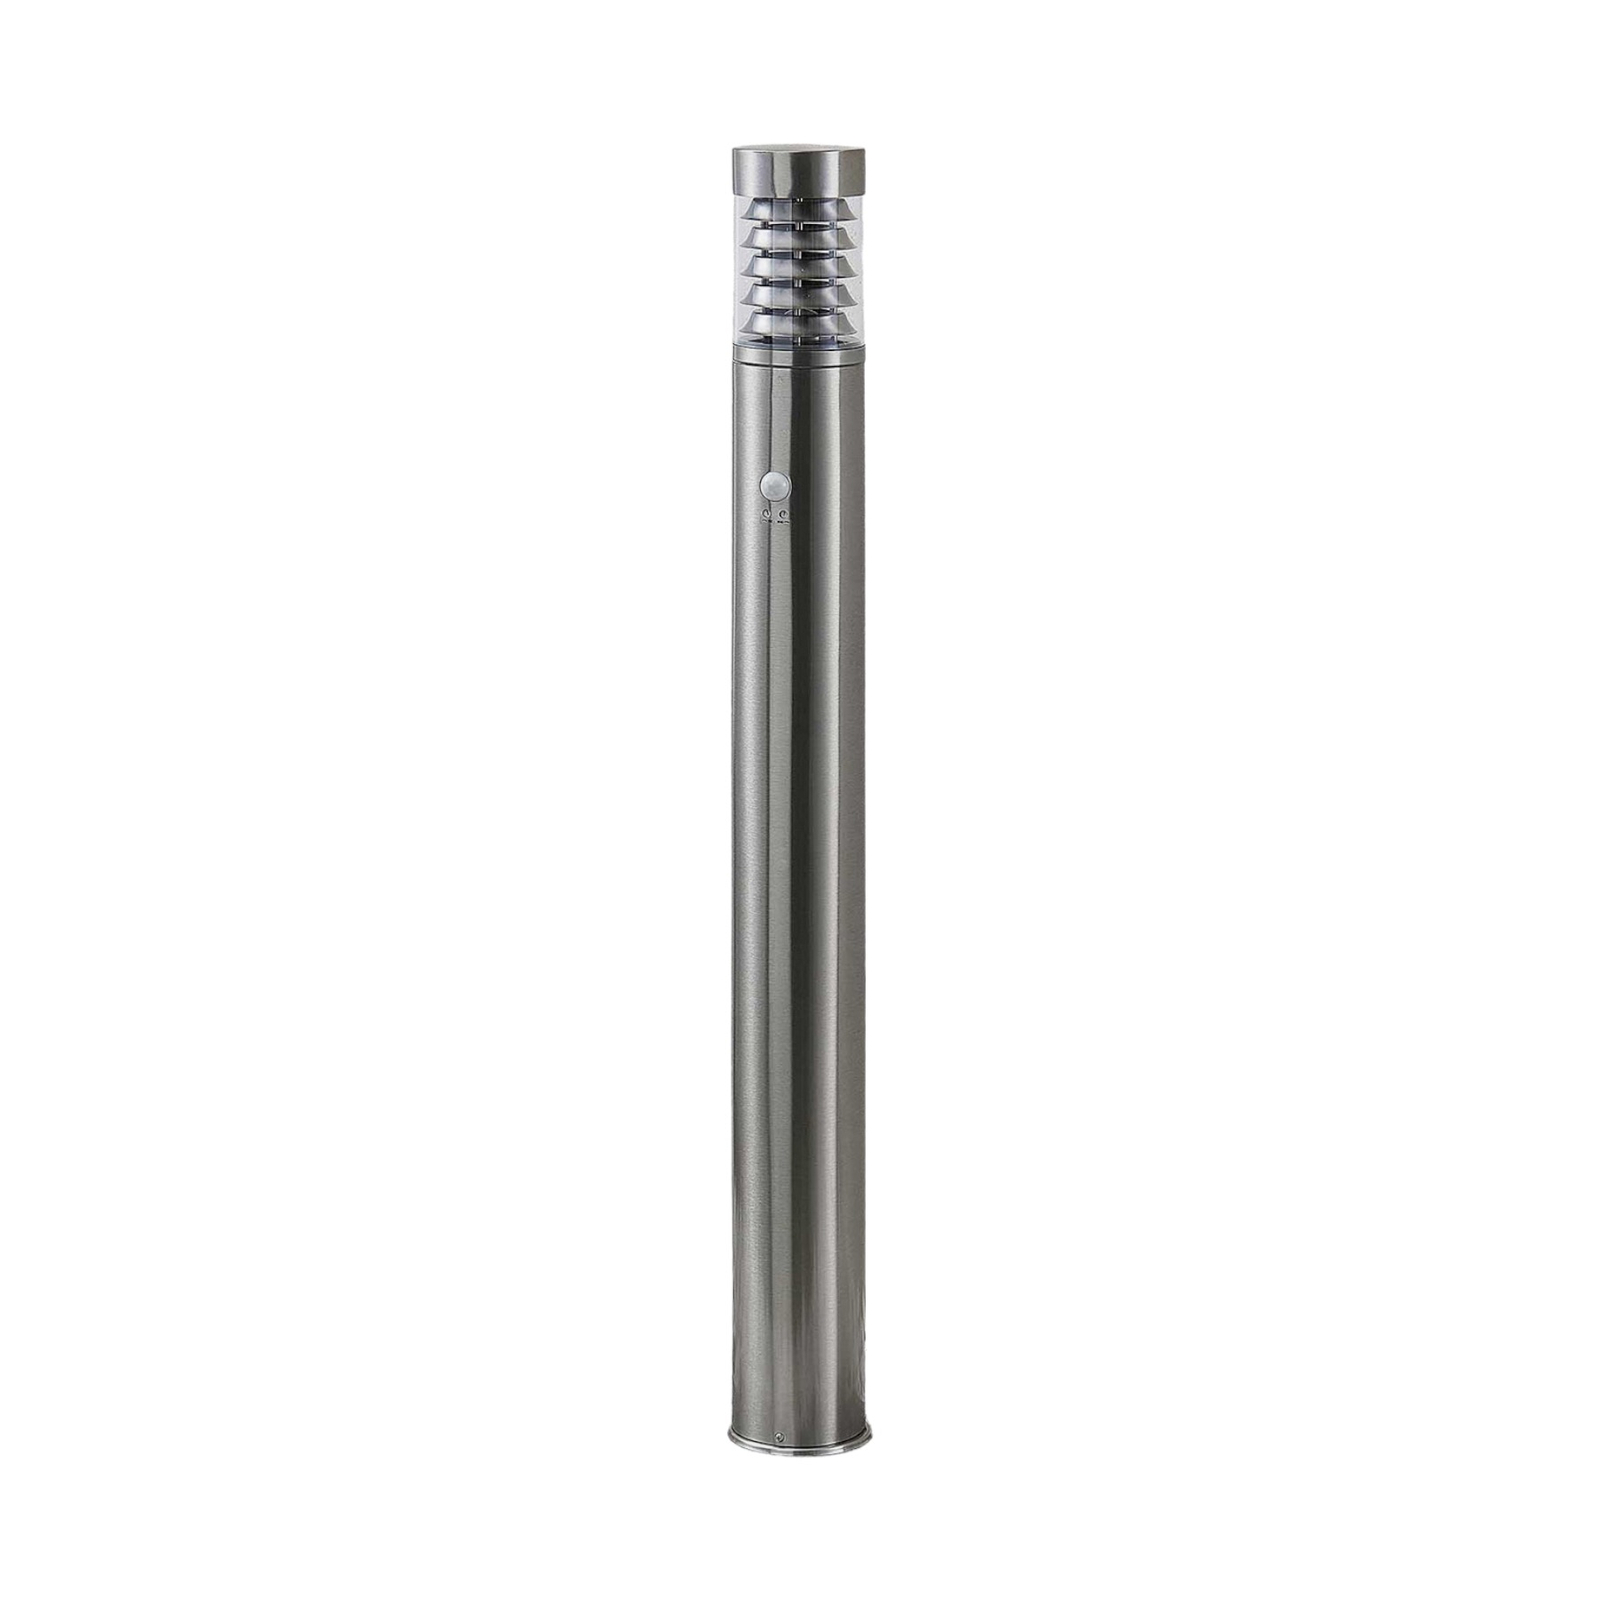 Lindby Piper sensor path light stainless steel